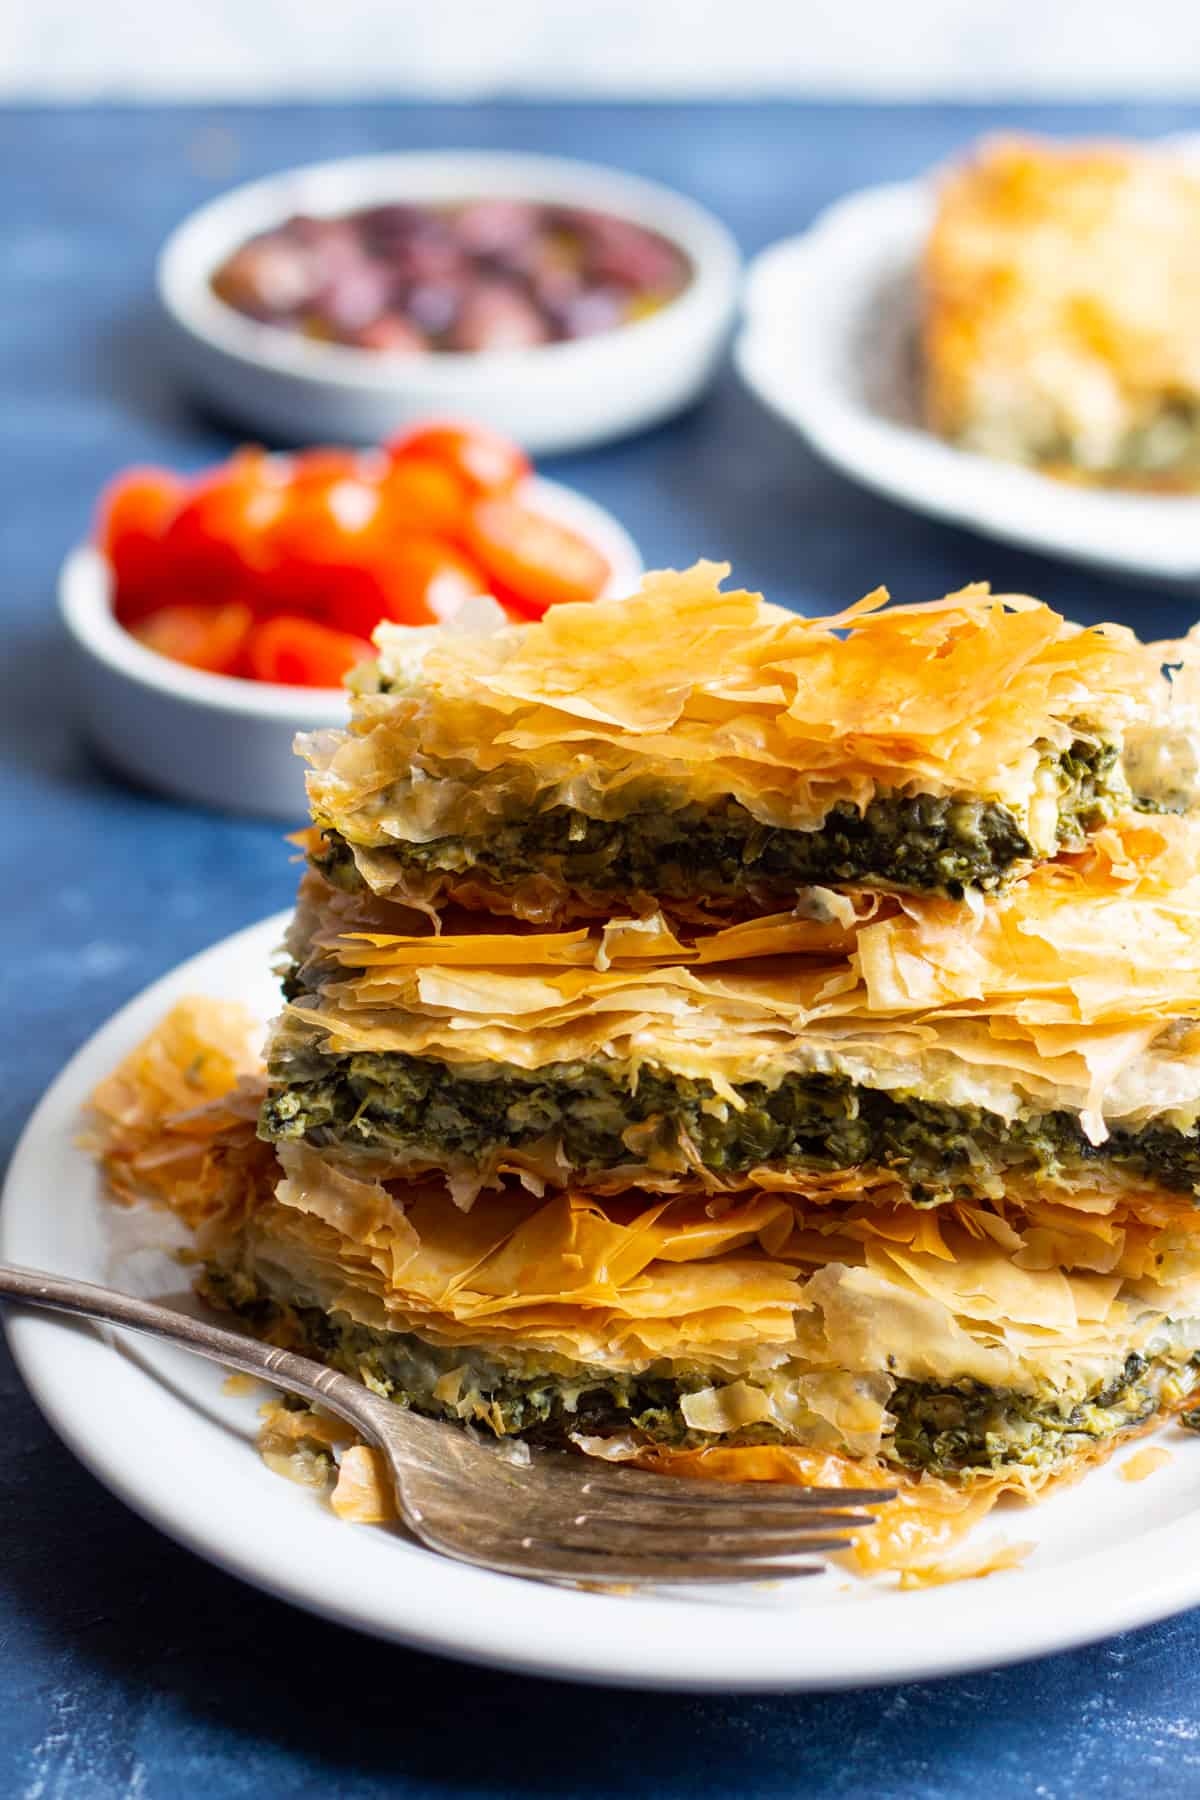 Here is a classic spanakopita recipe. This Greek spinach pie is made with phyllo dough, spinach and feta. It's packed with so much flavor. One slice is never enough! Be sure to check out our step by step tutorial and video. 
